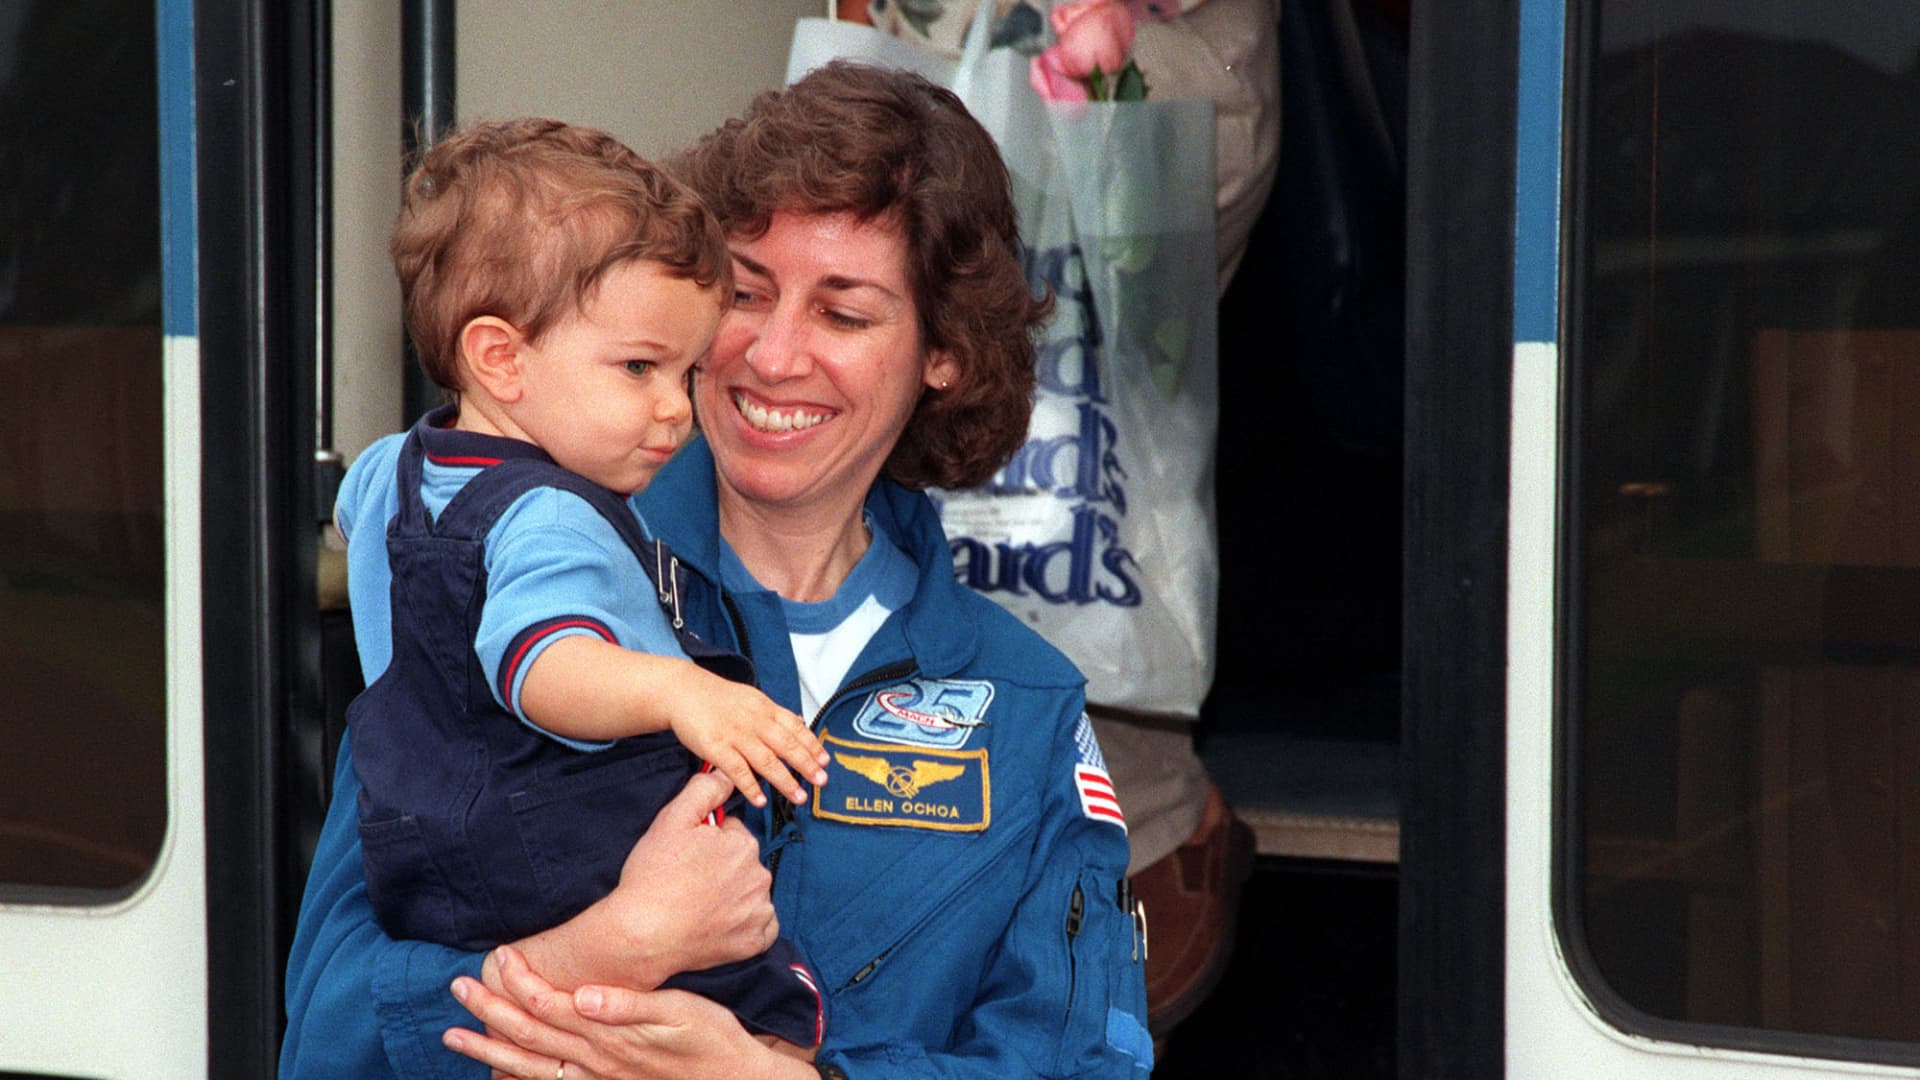 STS-96 Mission Specialist Ellen Ochoa holds her son, Wilson Miles-Ochoa as she steps off the bus at the Cape Canaveral Air Station Skid Strip June 7, 1999. The STS-96 crew members are preparing to return to the Johnson Space Center in Houston, Texas, after a successful 10-day mission to the International Space Station aboard Space Shuttle Discovery. (photo by NASA)